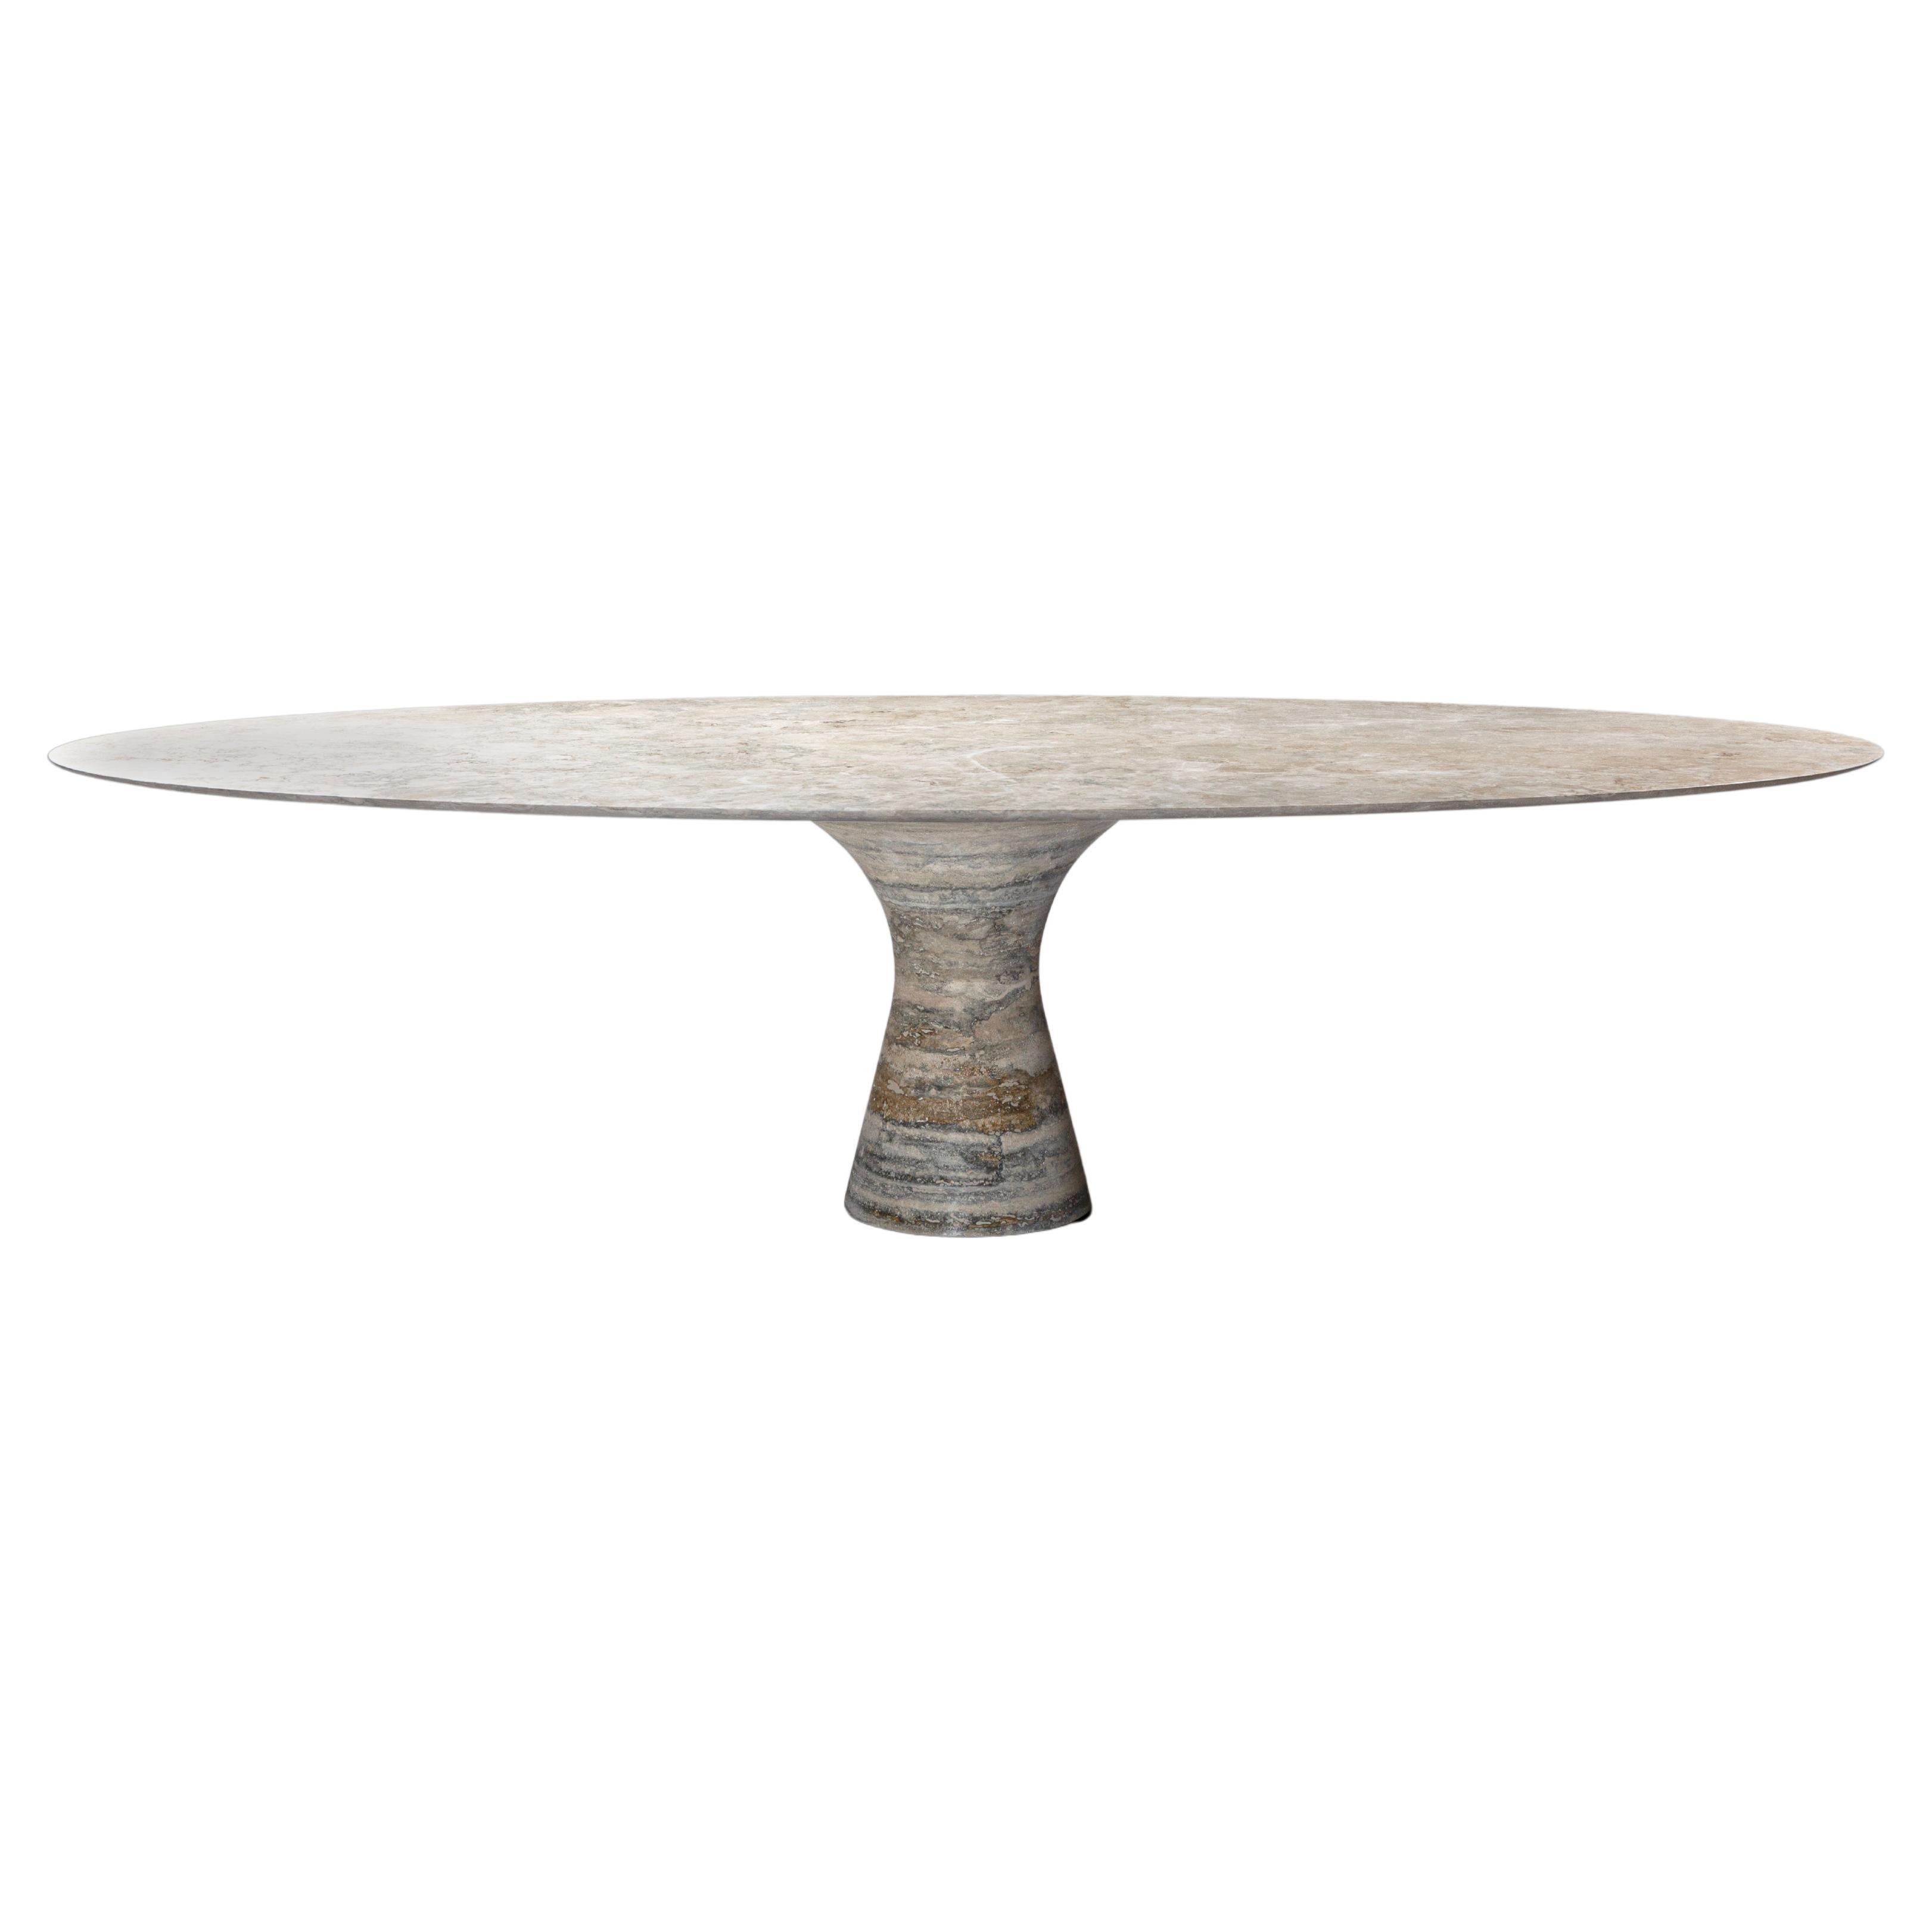 Travertino Silver Refined Contemporary Marble Dining Table 160/75